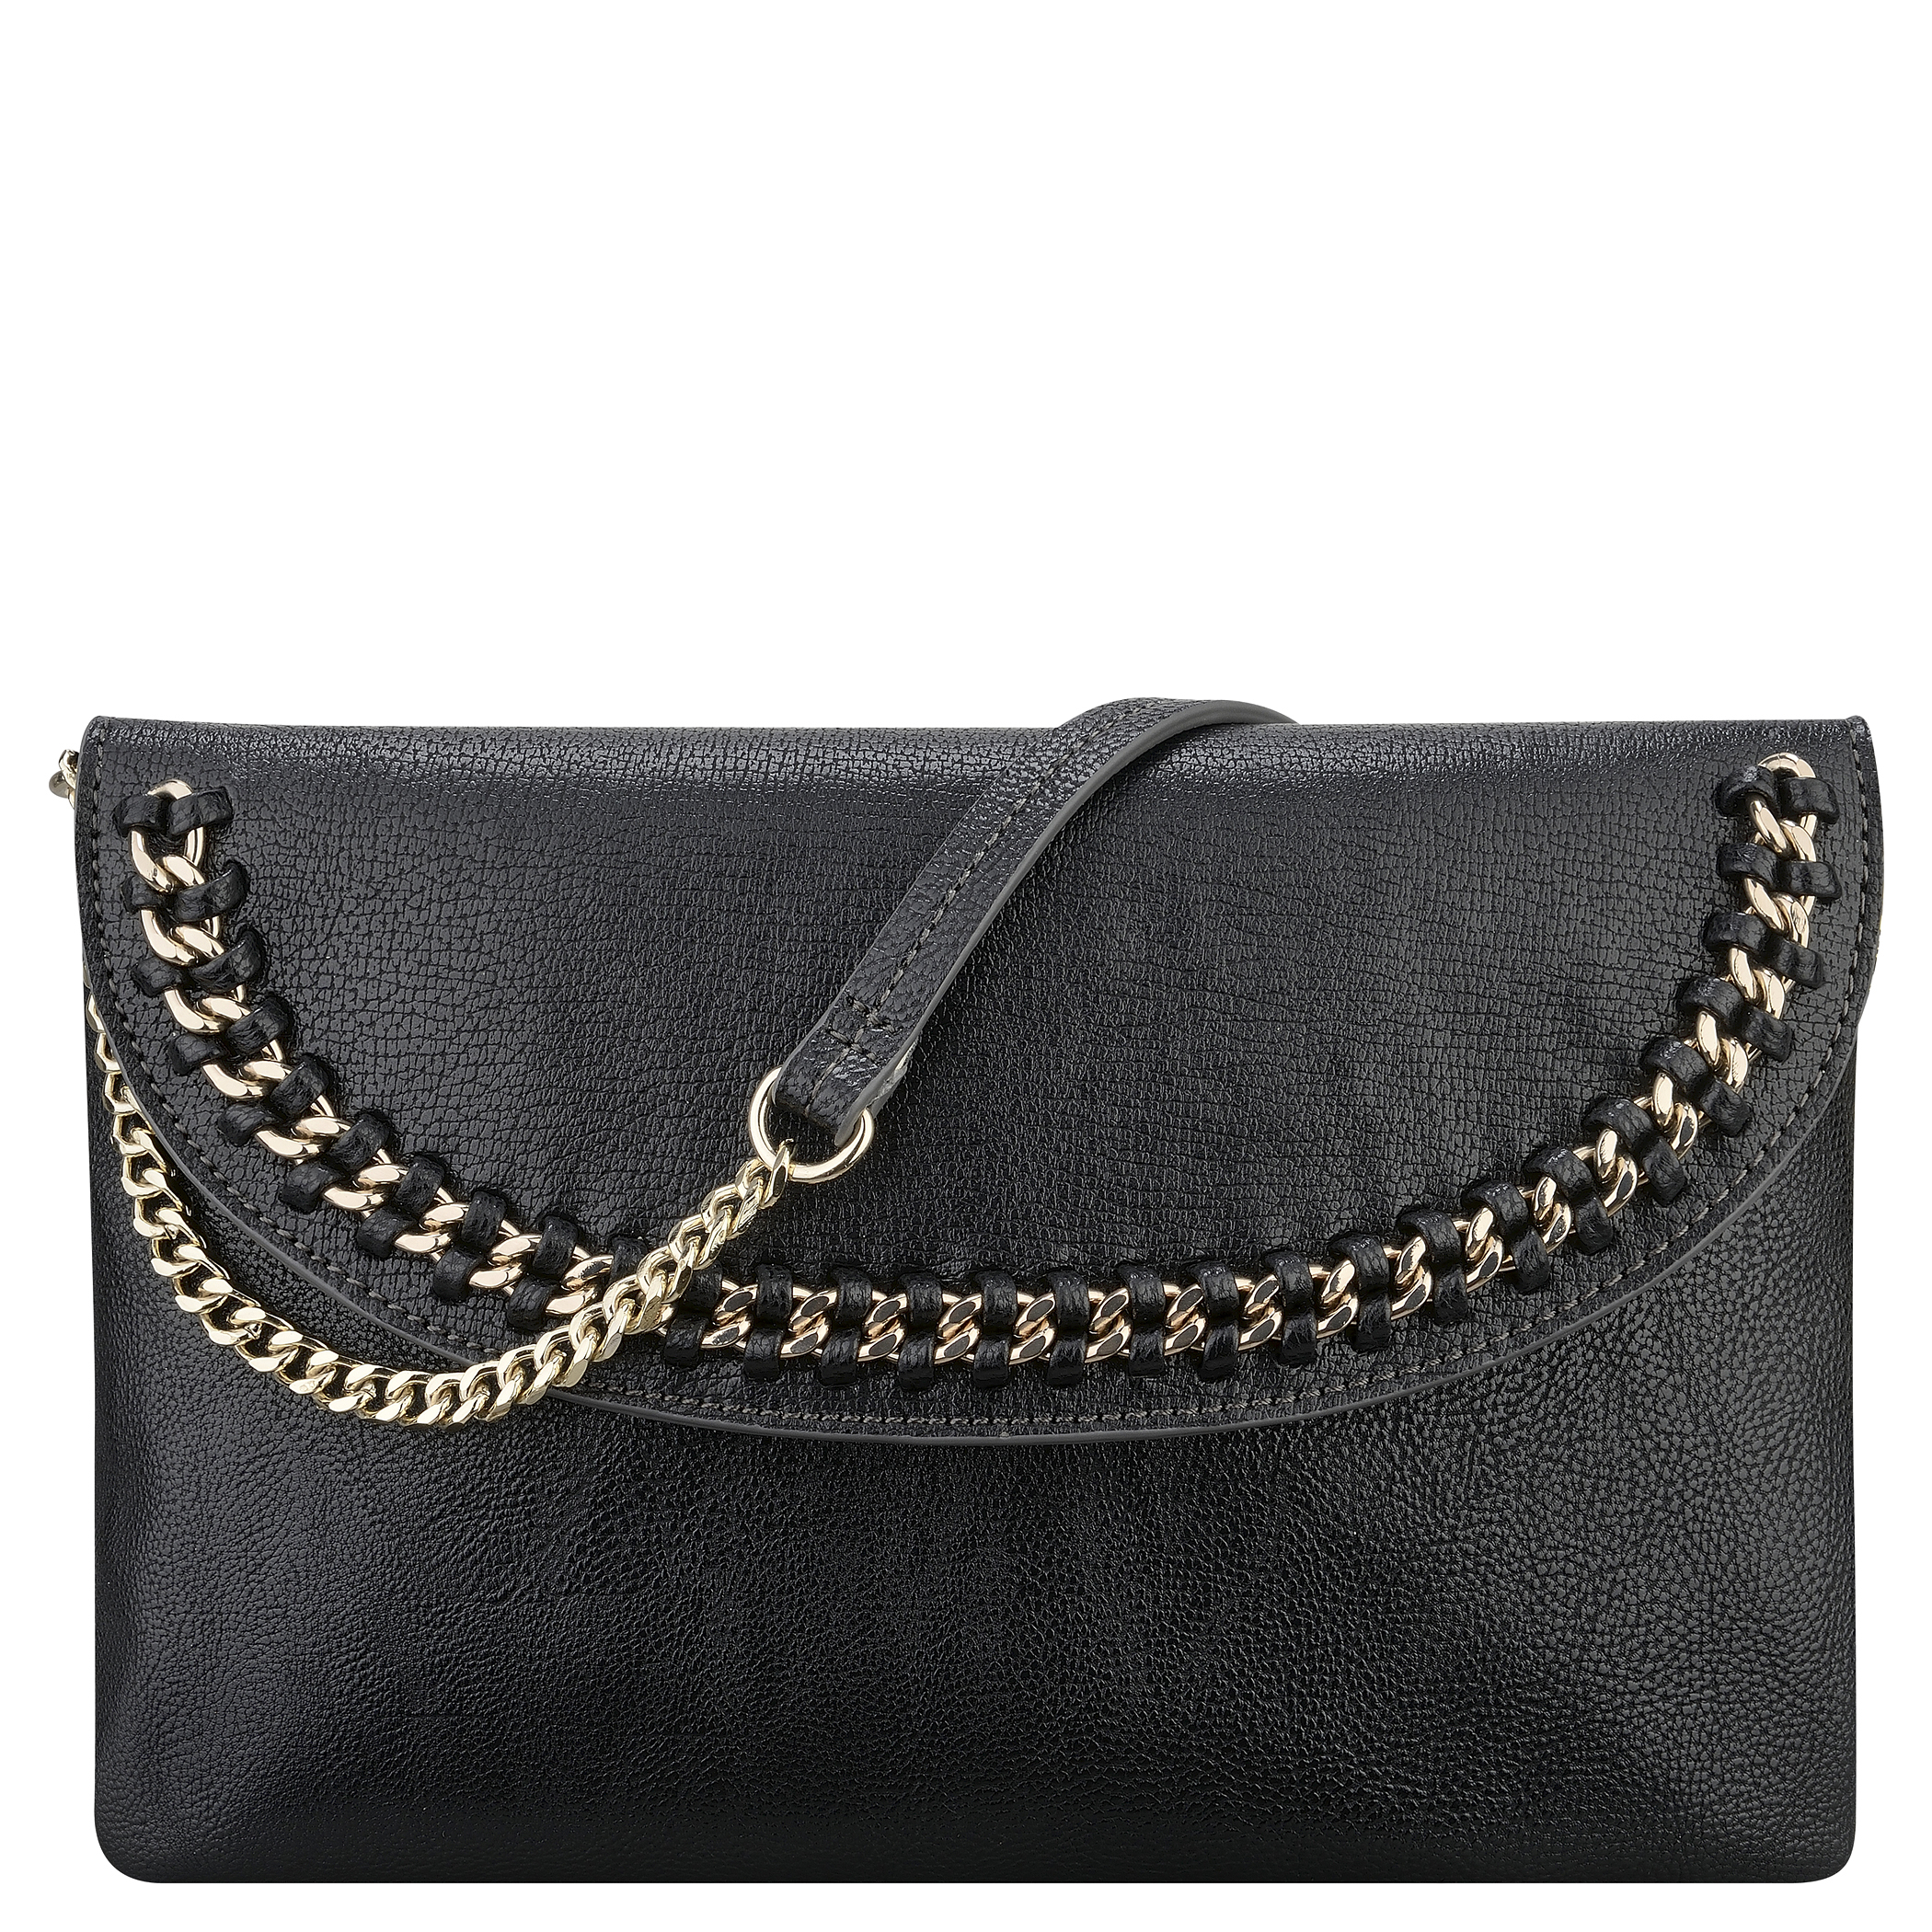 Lyst - Nine West Off The Chain Clutch Bag in Black